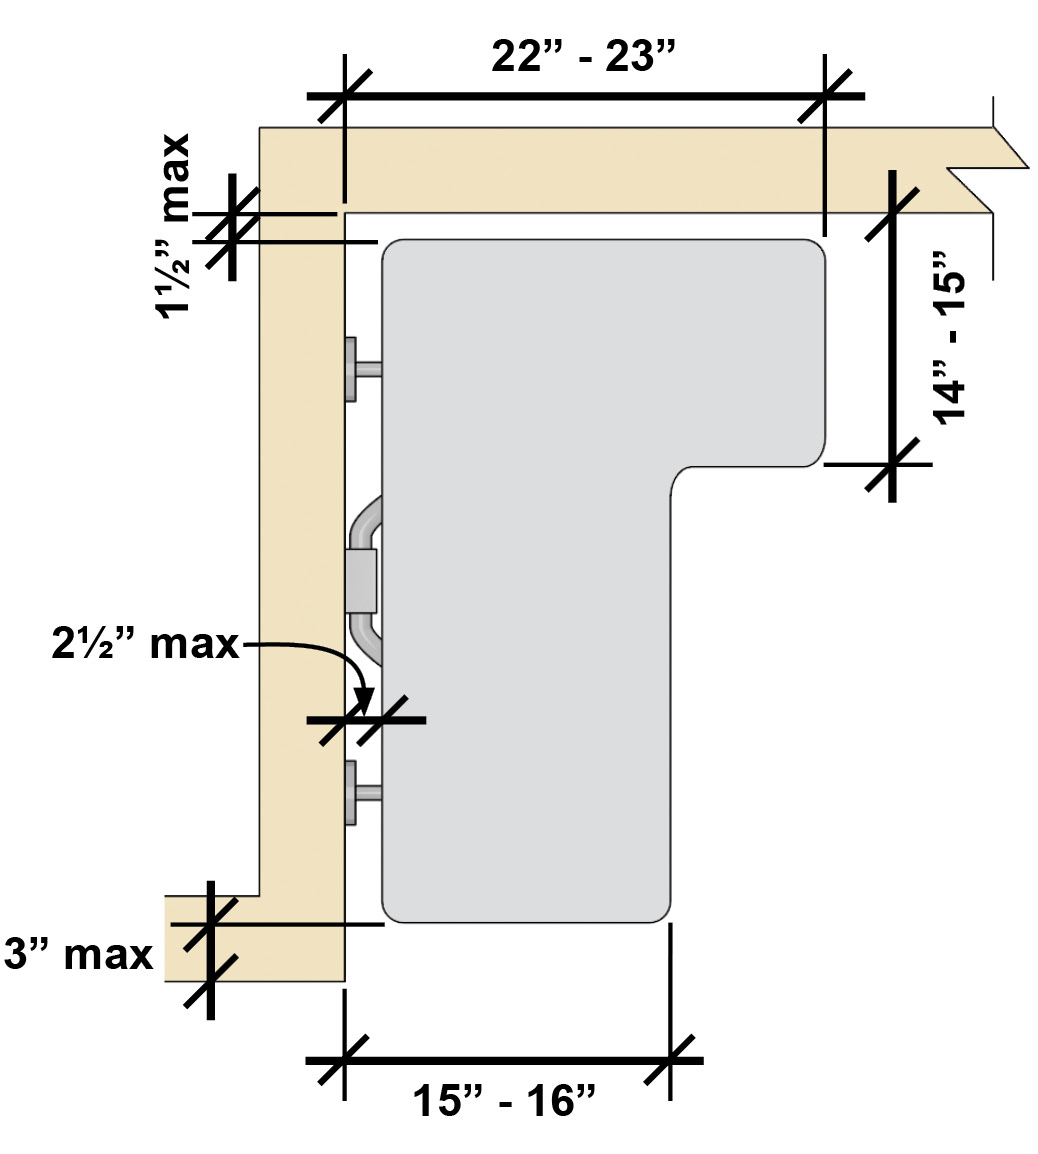 L-shaped shower seat with a rear edge that is 2½ inches max. from the seat wall and a front edge 15 inches to 16 inches from the seat wall. The rear edge of the L-portion is 1 ½ inches from the wall and the front edge is 14 inches to 15 inches from the wall. The end of the L is 22 inches to 23 inches from the main seat wall.